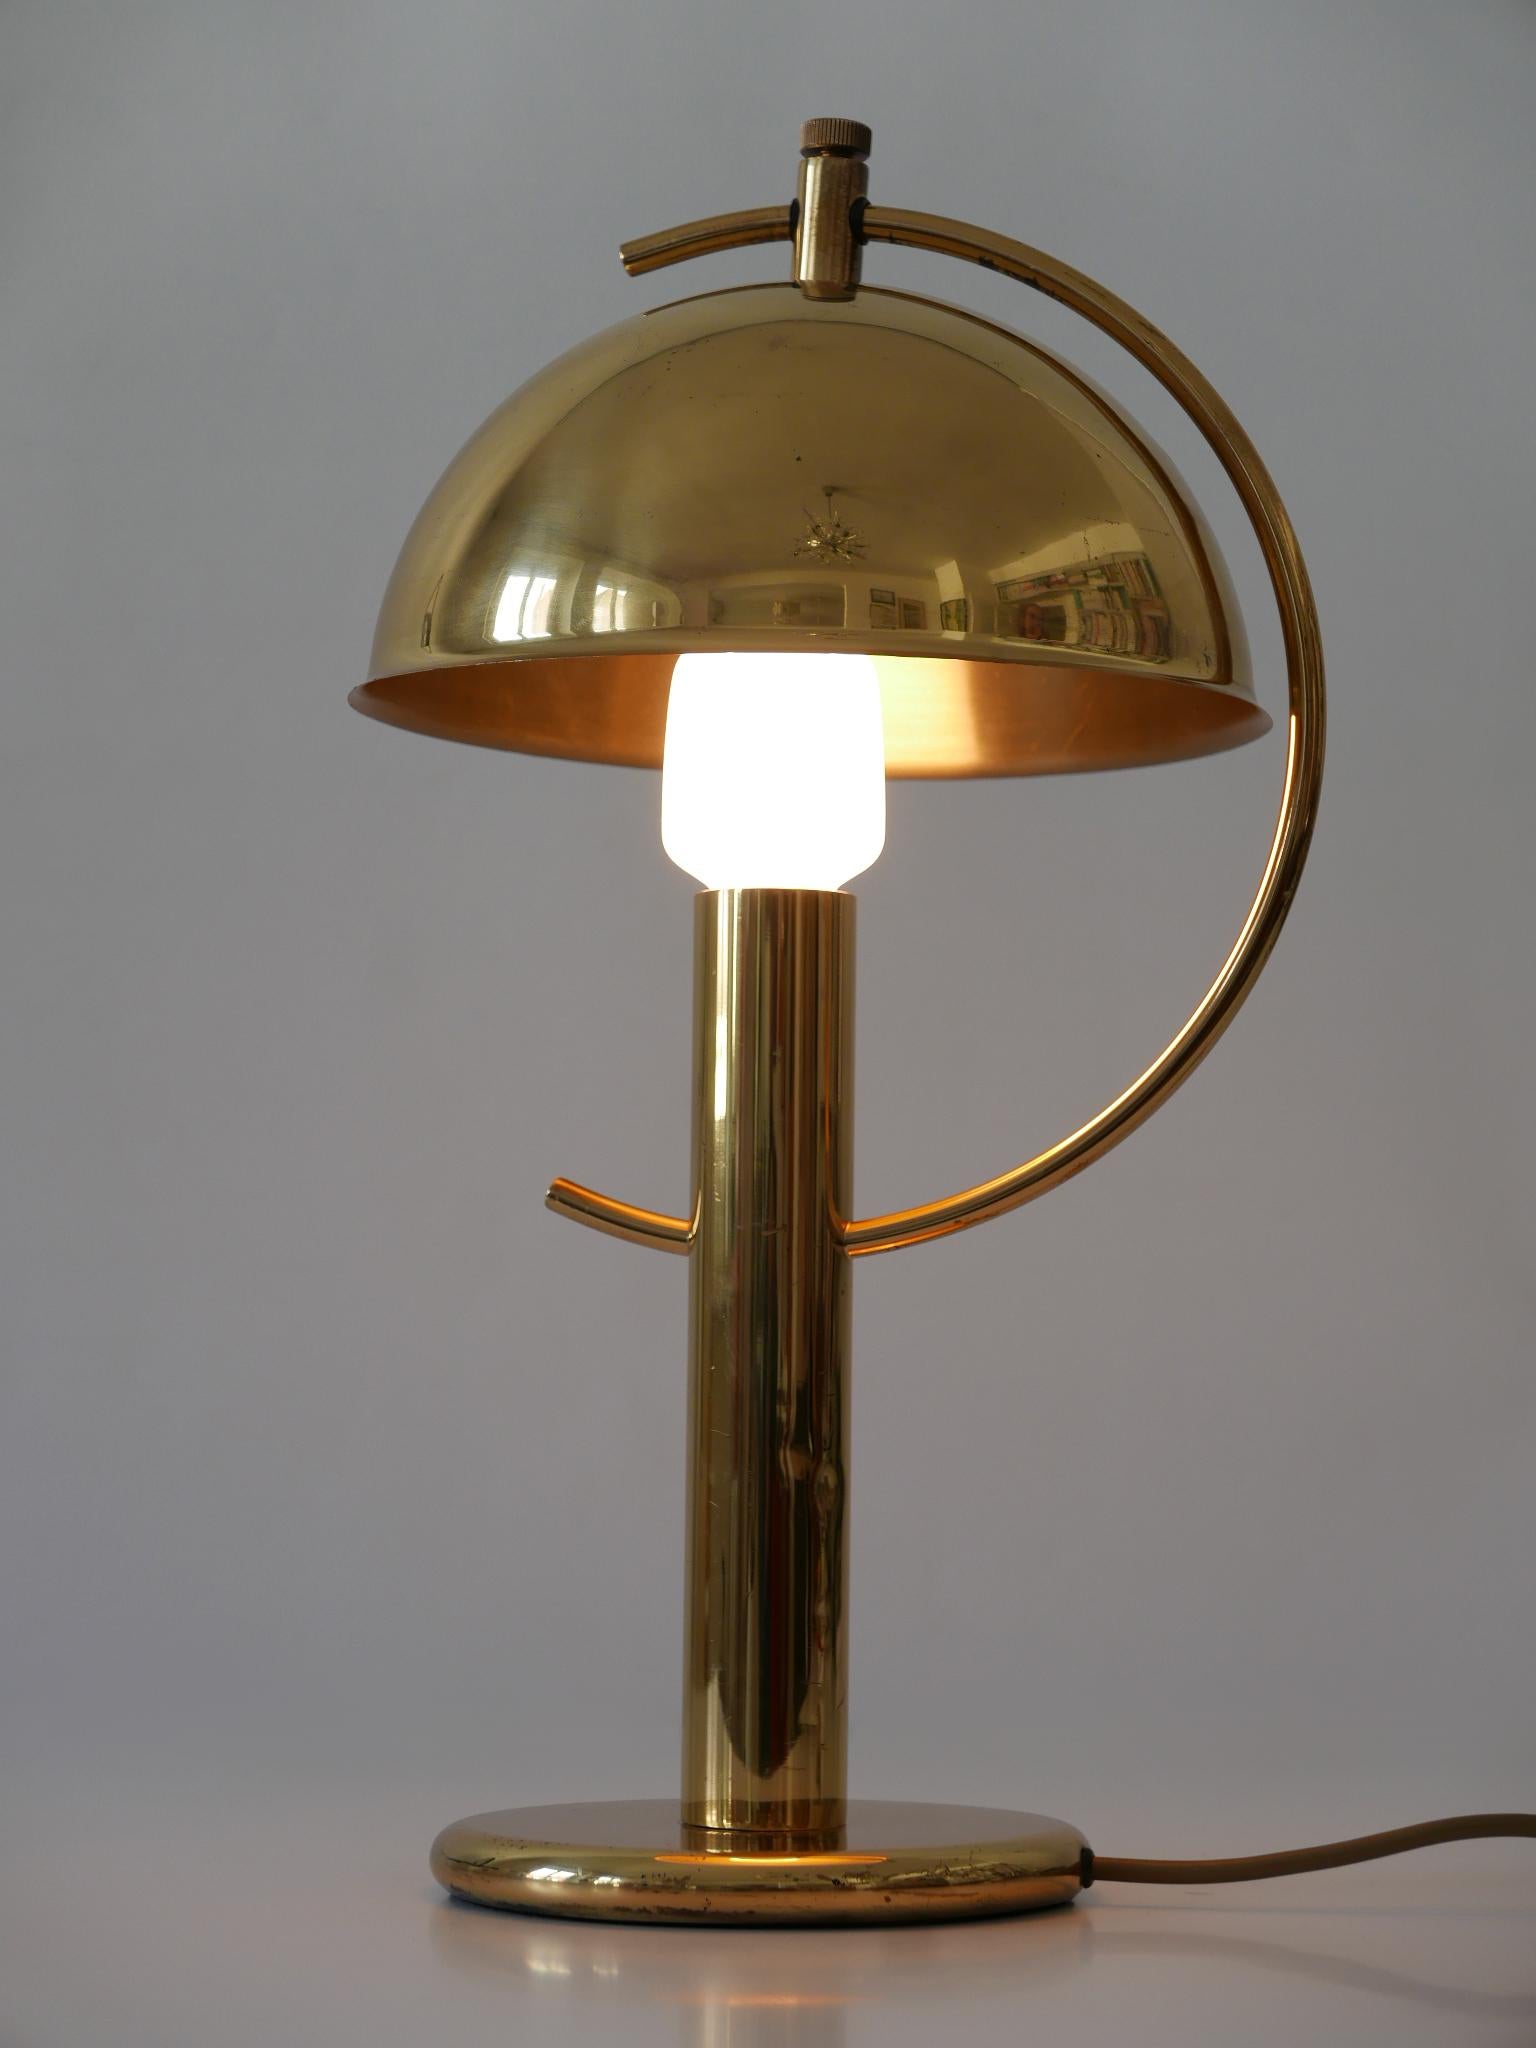 Exceptional Mid-Century Modern Brass Table Lamp by Gebrüder Cosack Germany 1960s For Sale 4